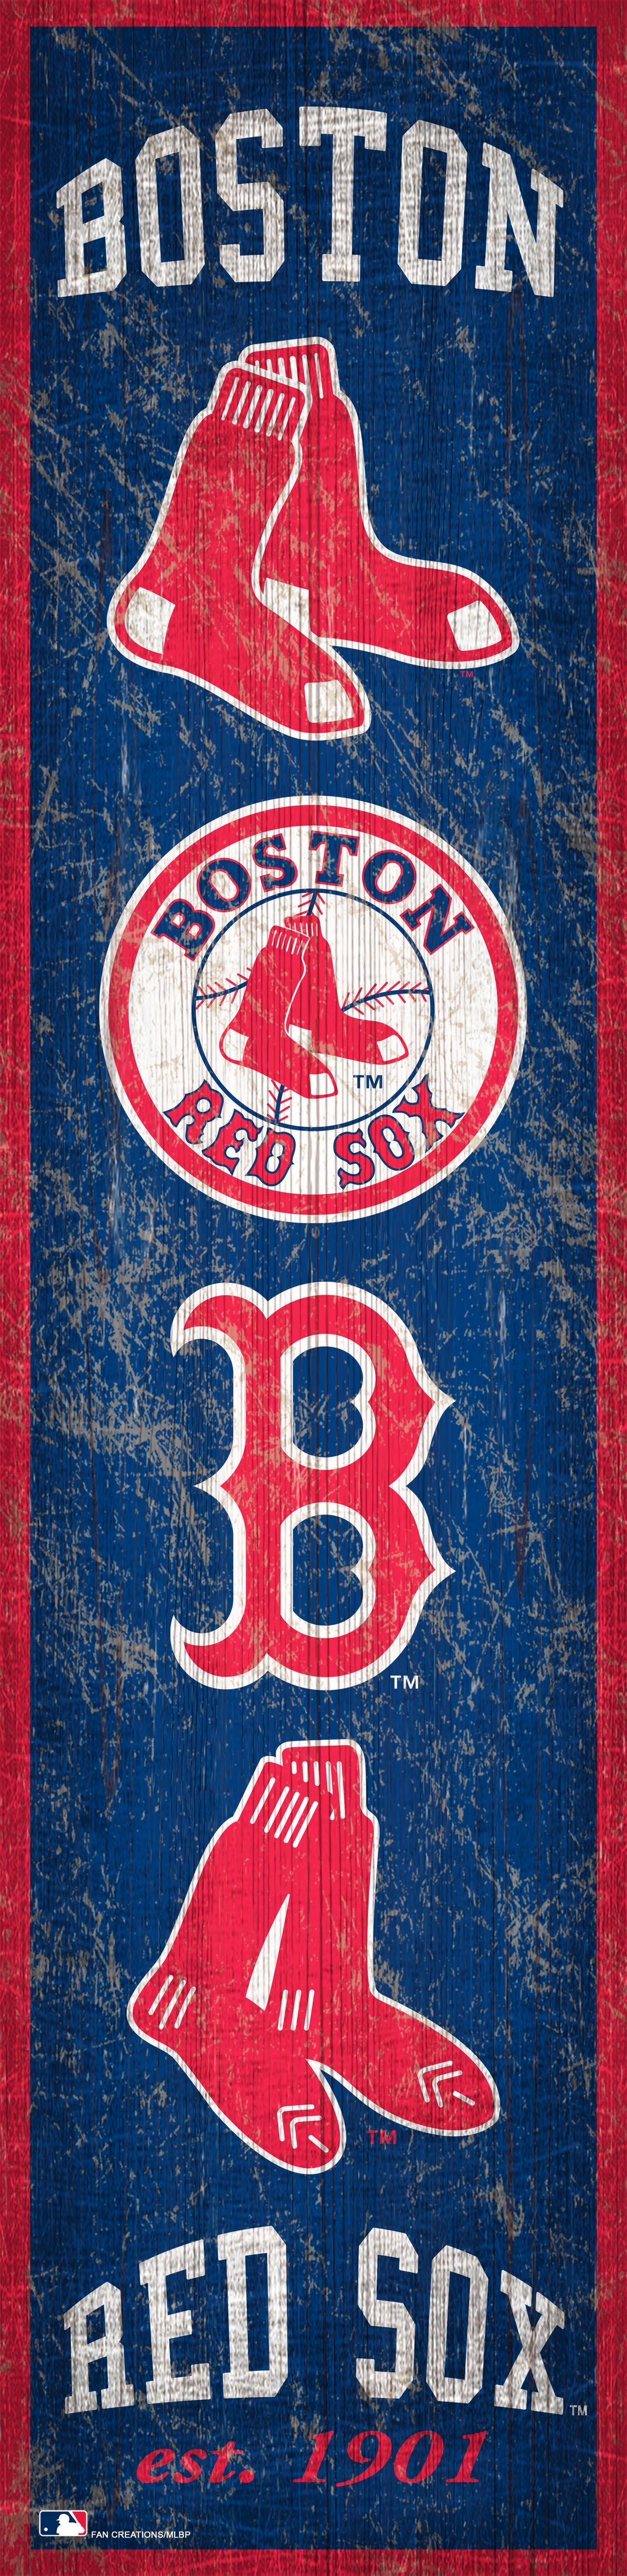 Boston Red Sox Heritage Banner Wood Sign - 6